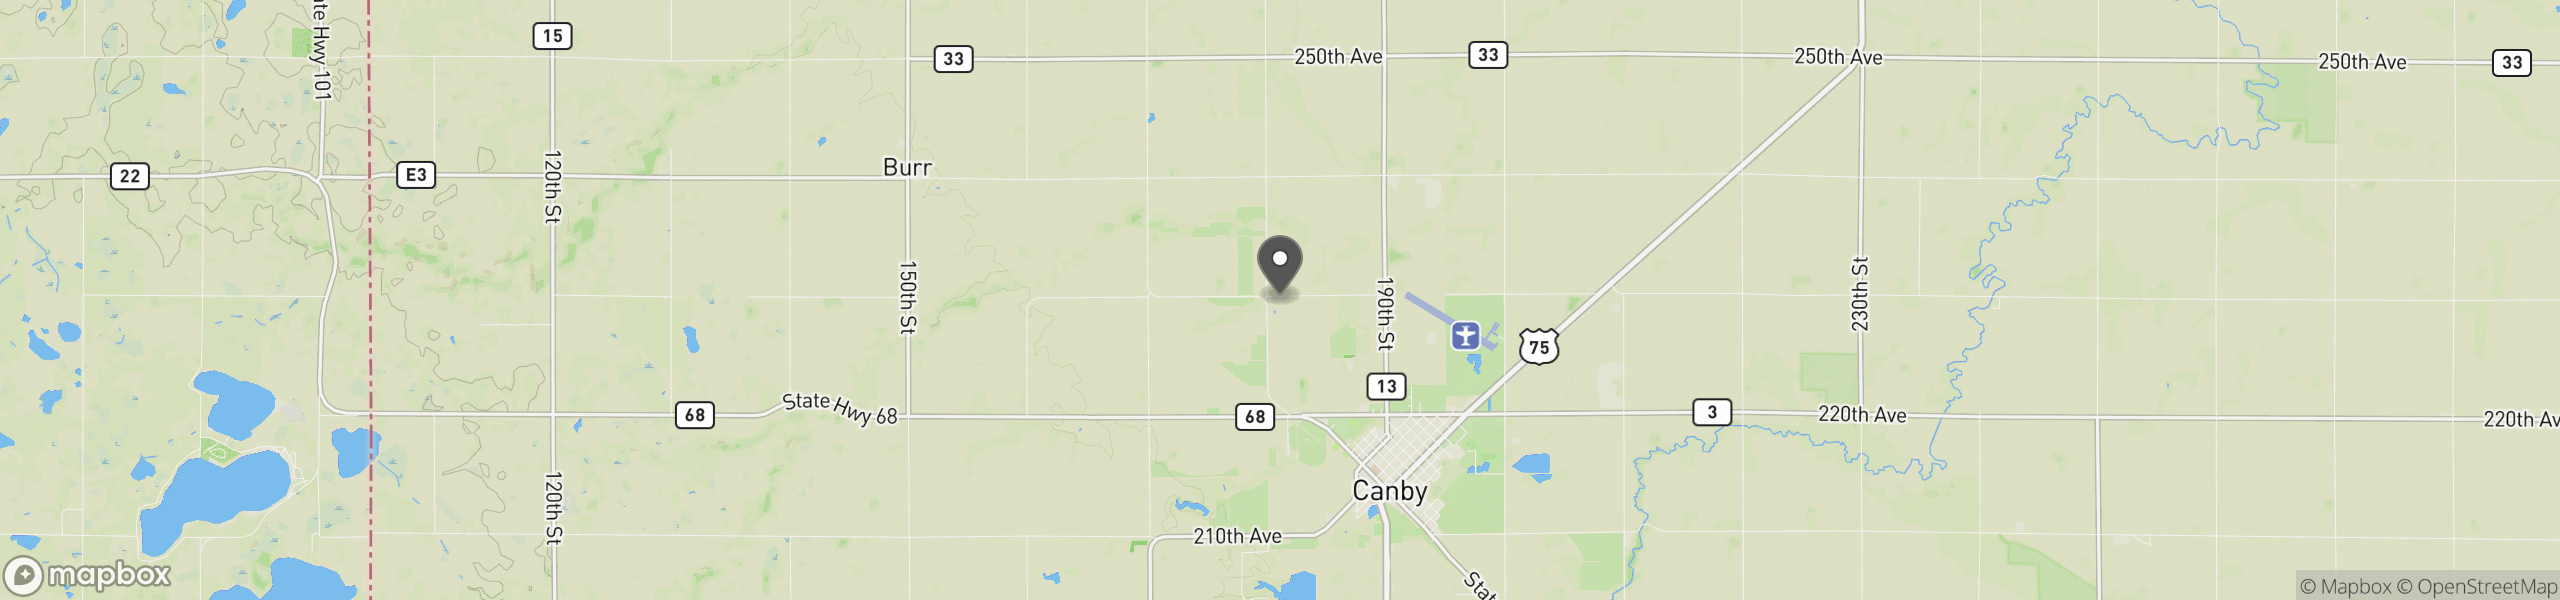 Canby, MN 56220